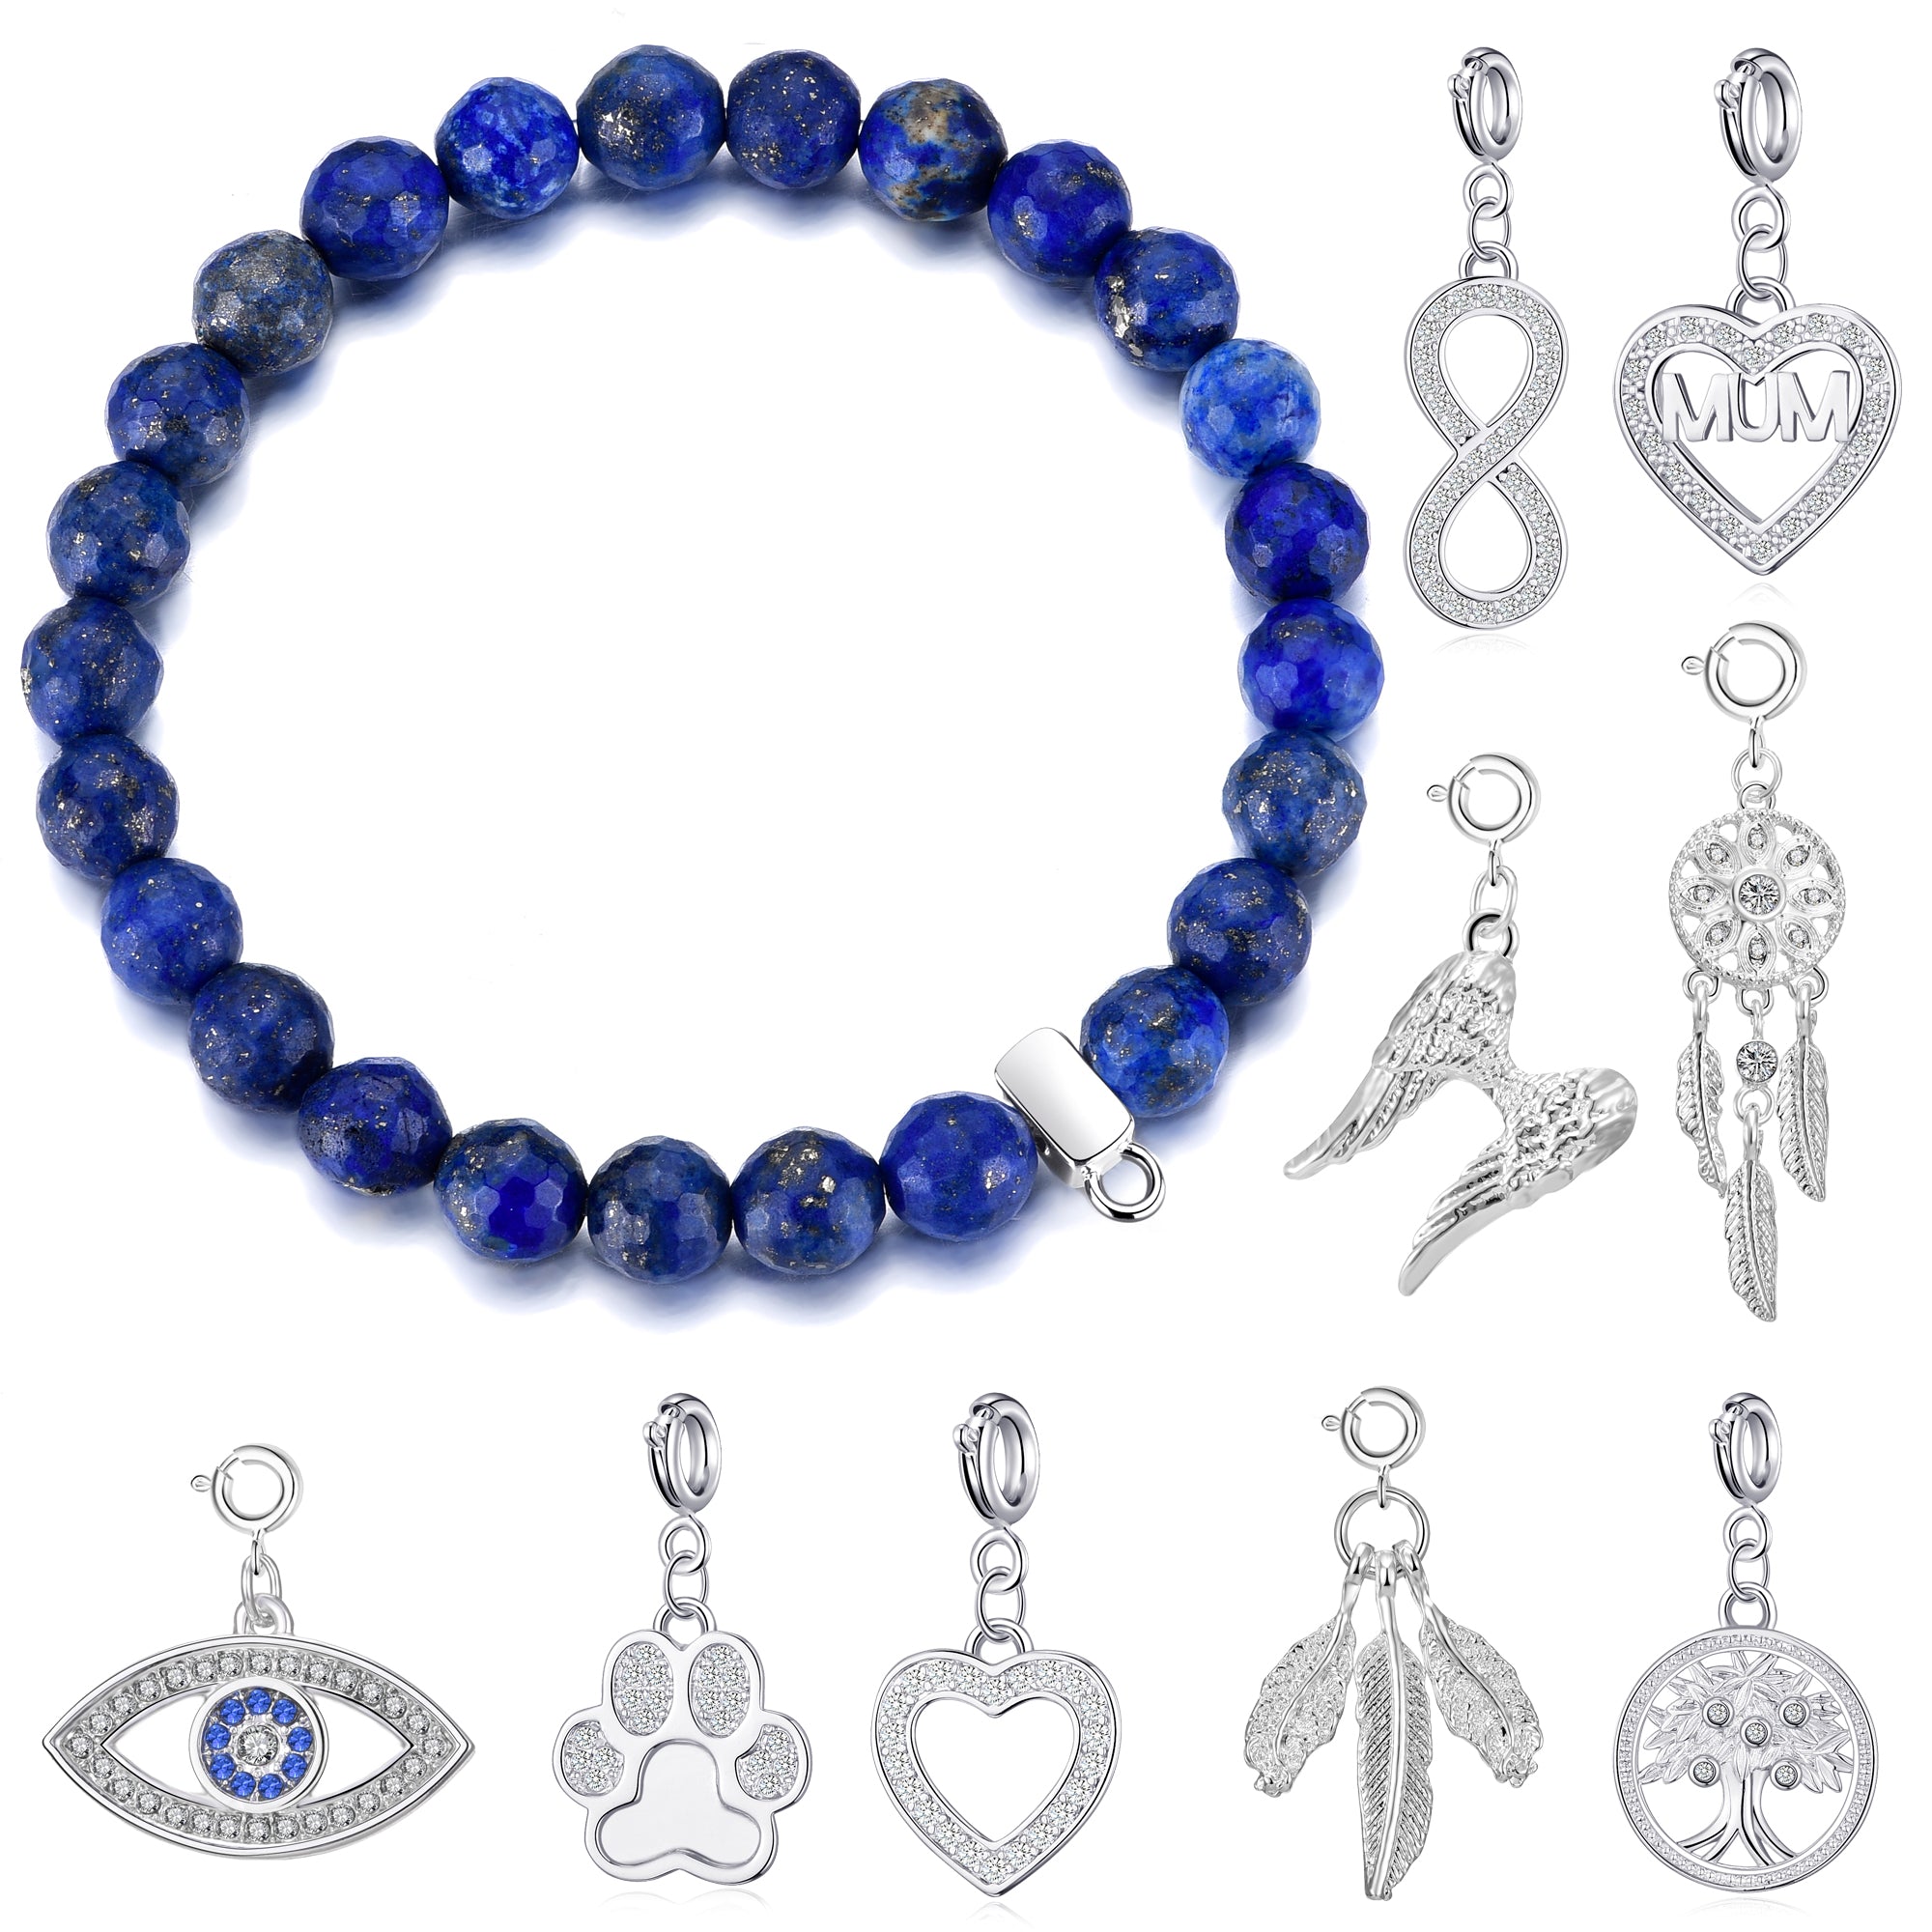 Faceted Lapis Gemstone Stretch Bracelet with Charm Created with Zircondia® Crystals by Philip Jones Jewellery